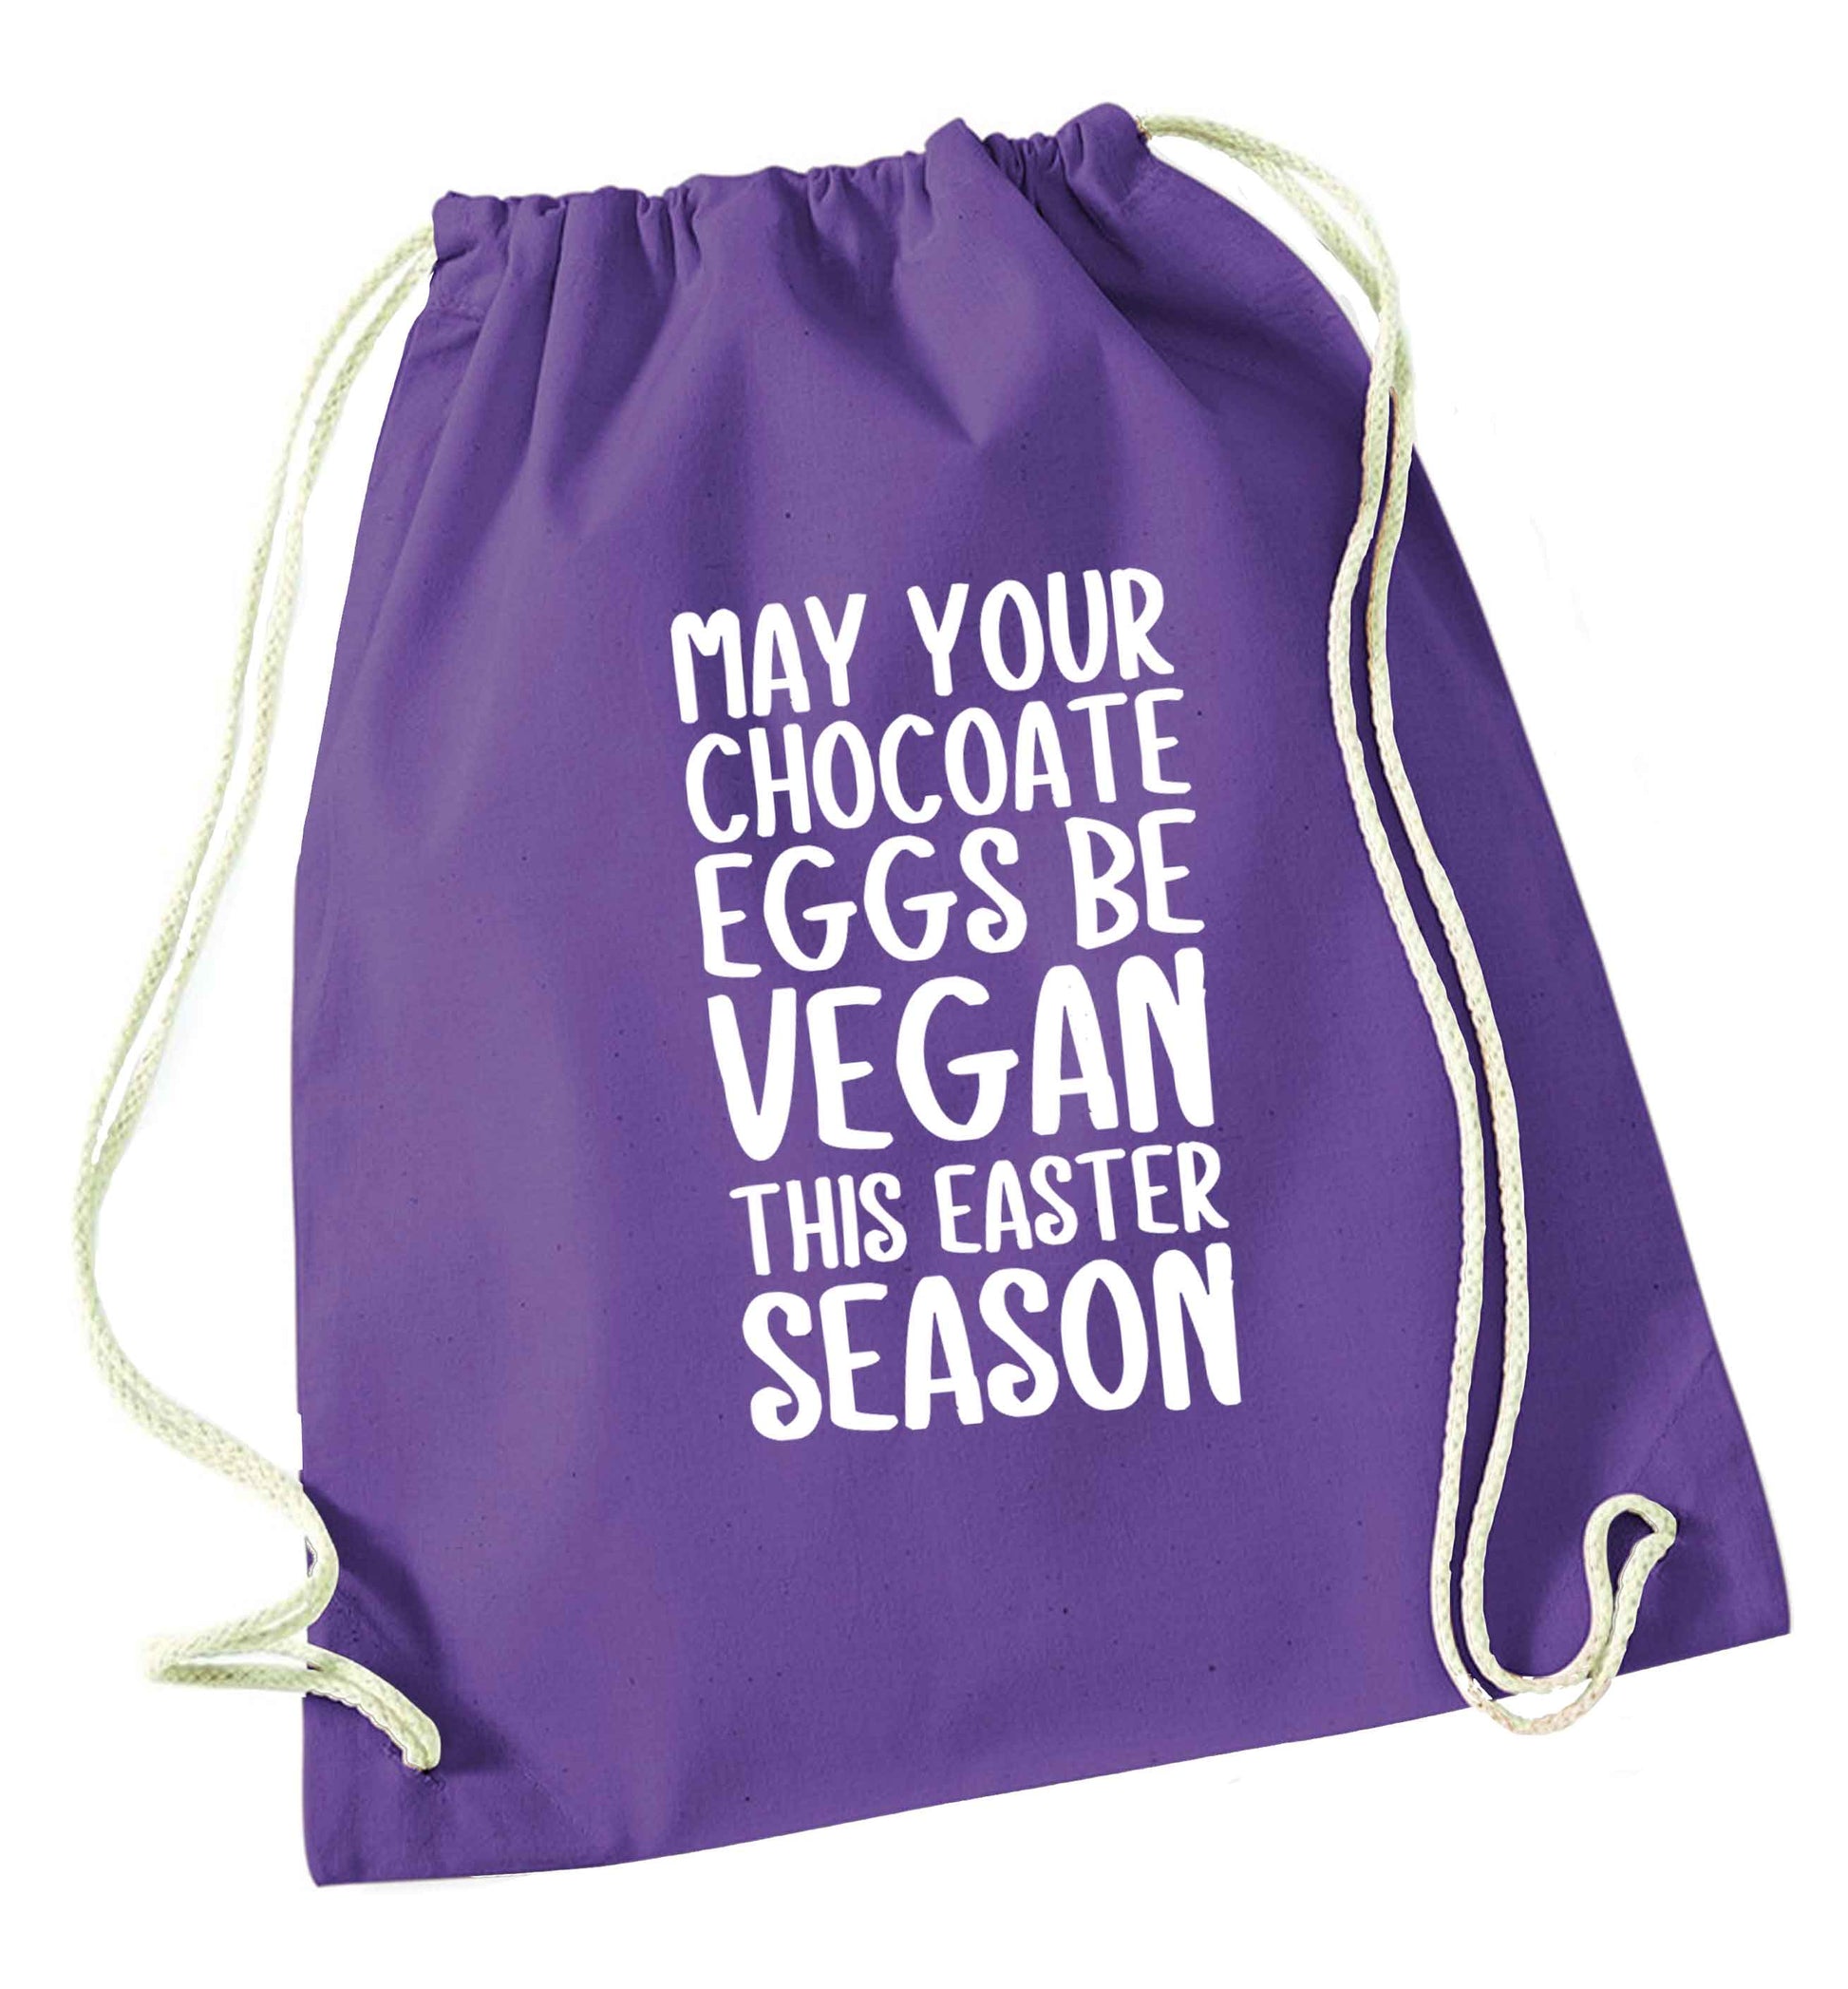 Easter bunny approved! Vegans will love this easter themed purple drawstring bag